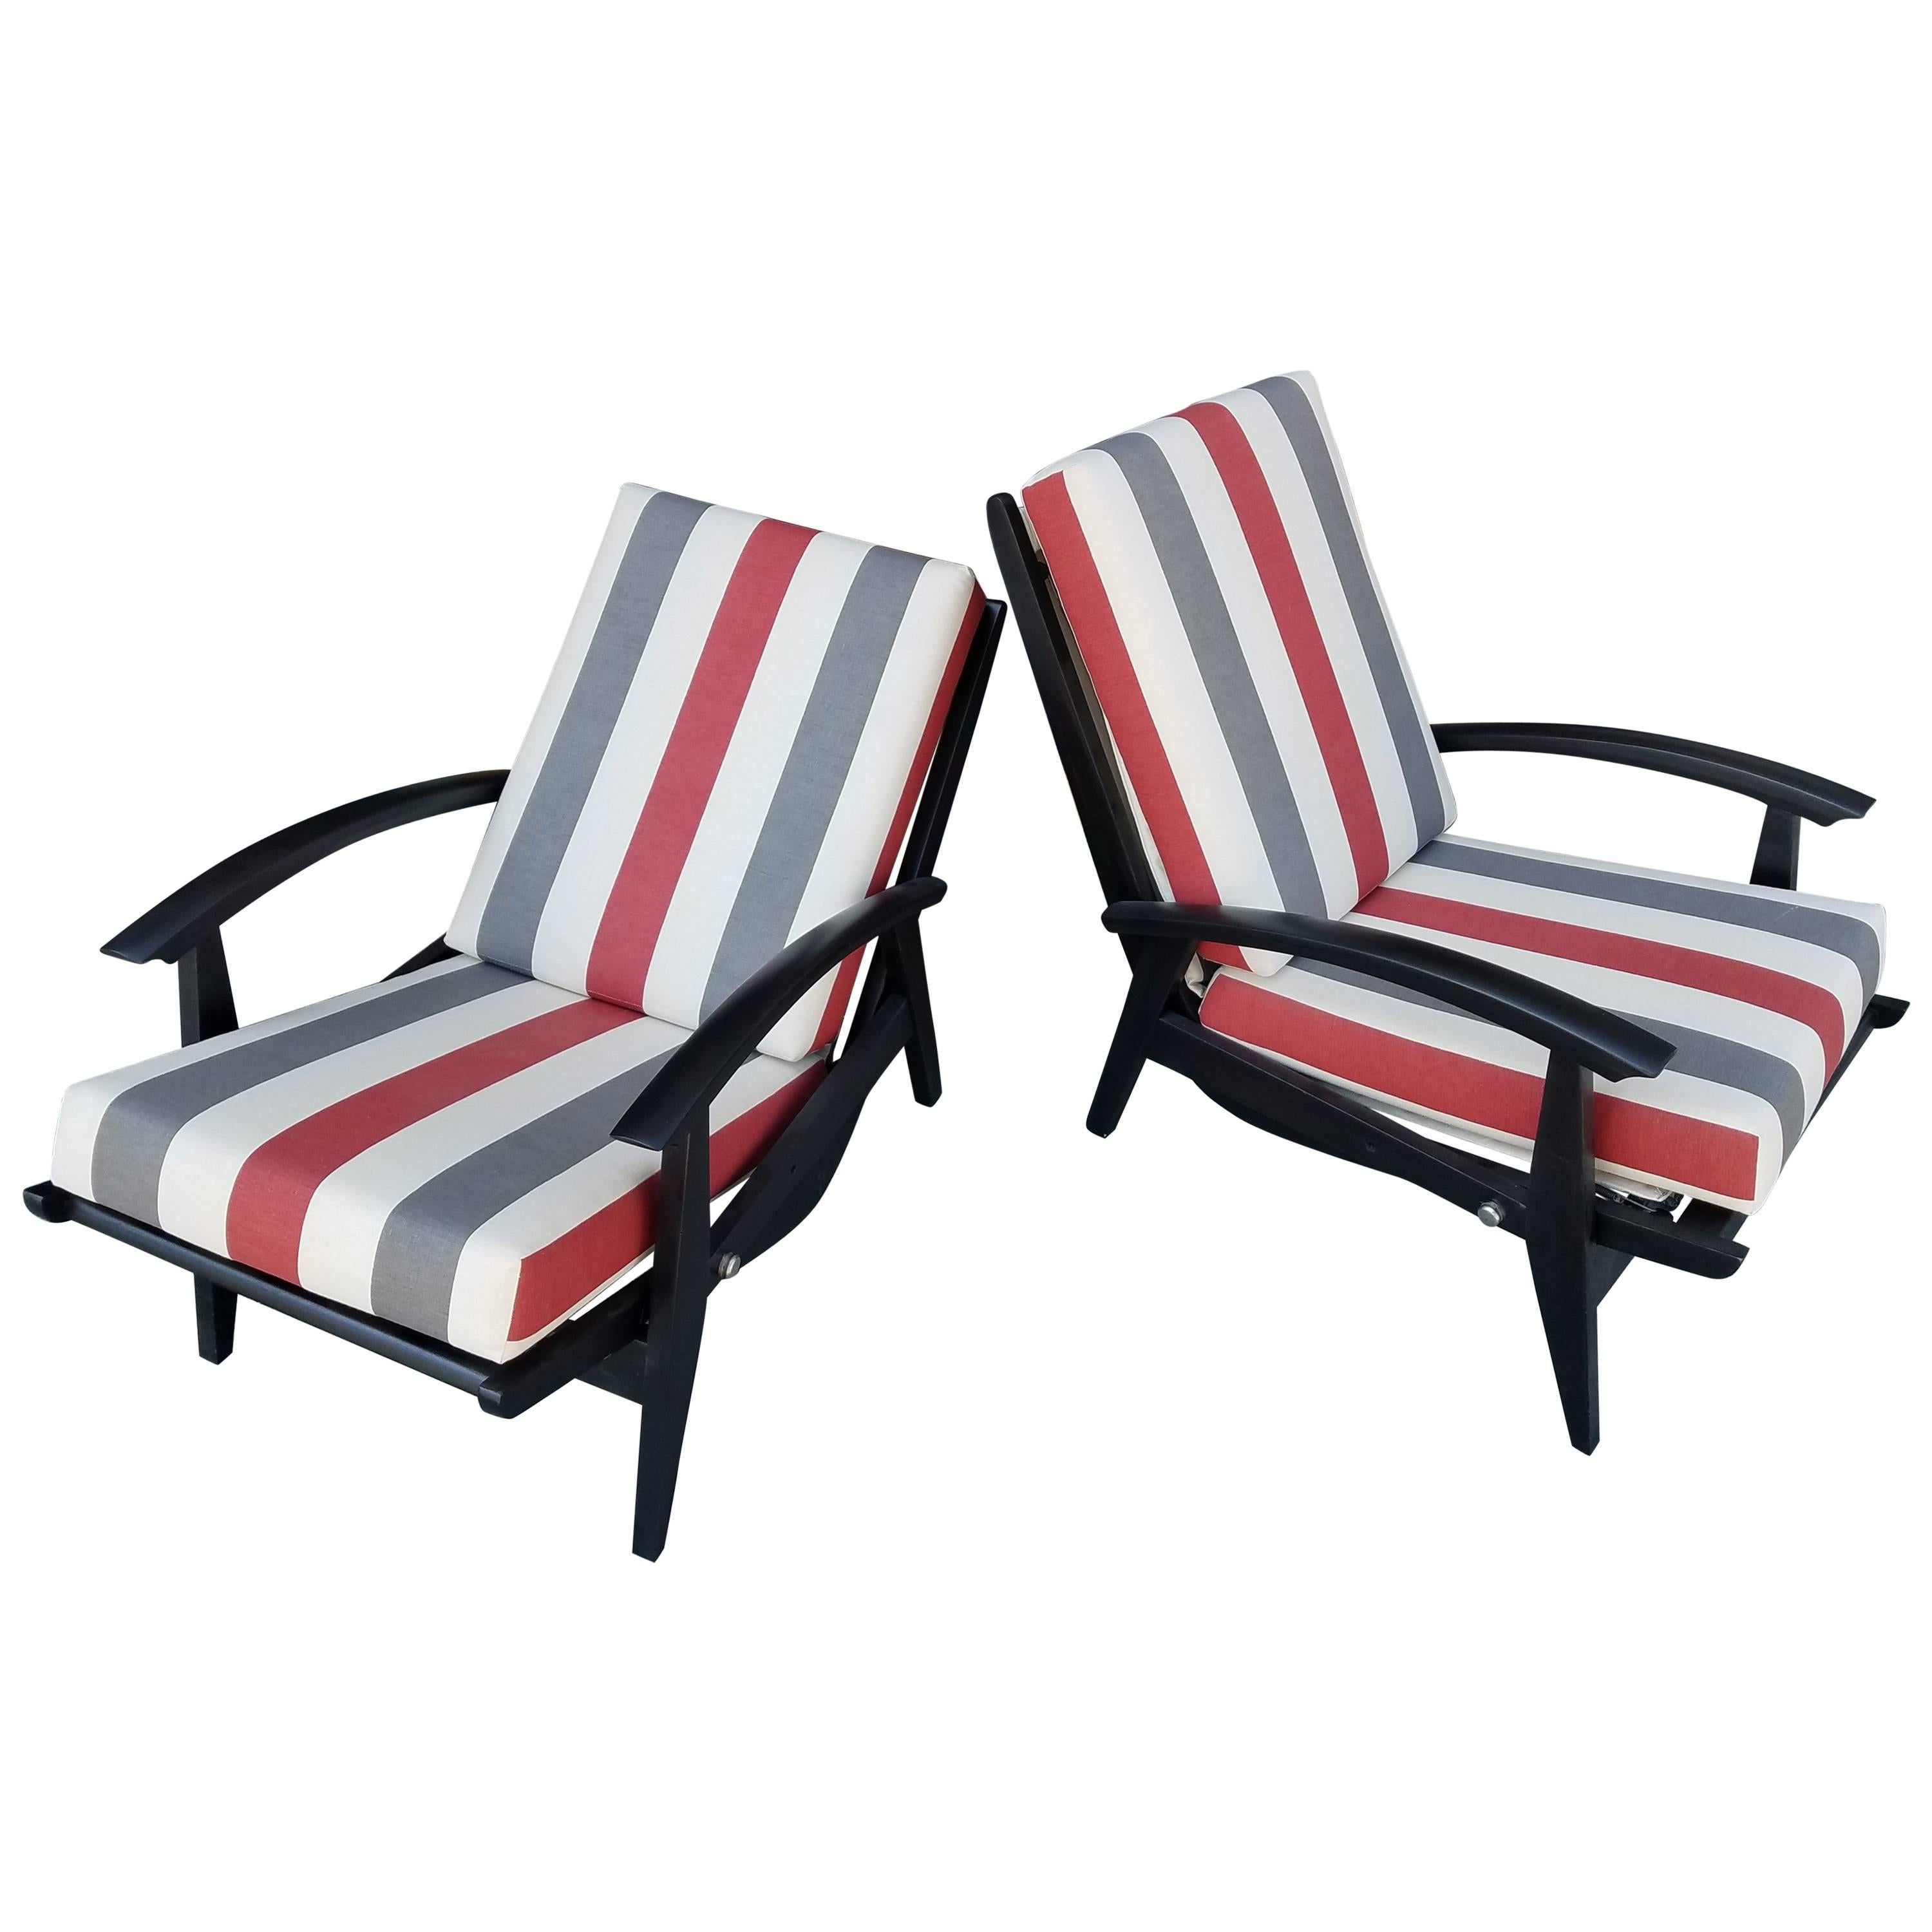 Italian Lounge Chairs for the Sorrento Hotel in Capri